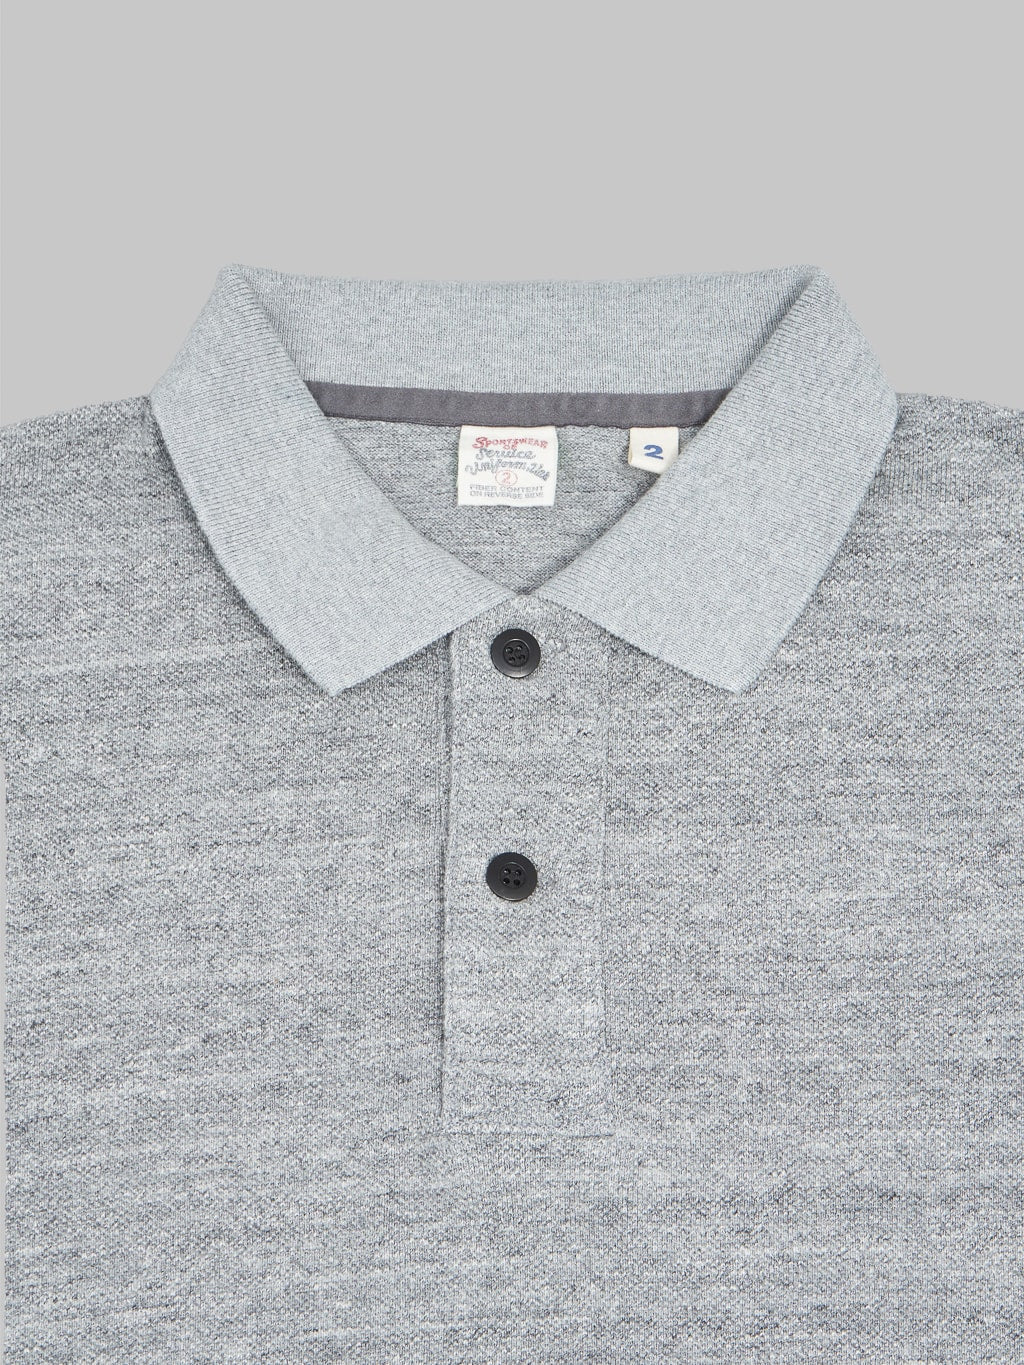 ues polo shirt grey collar buttons detail